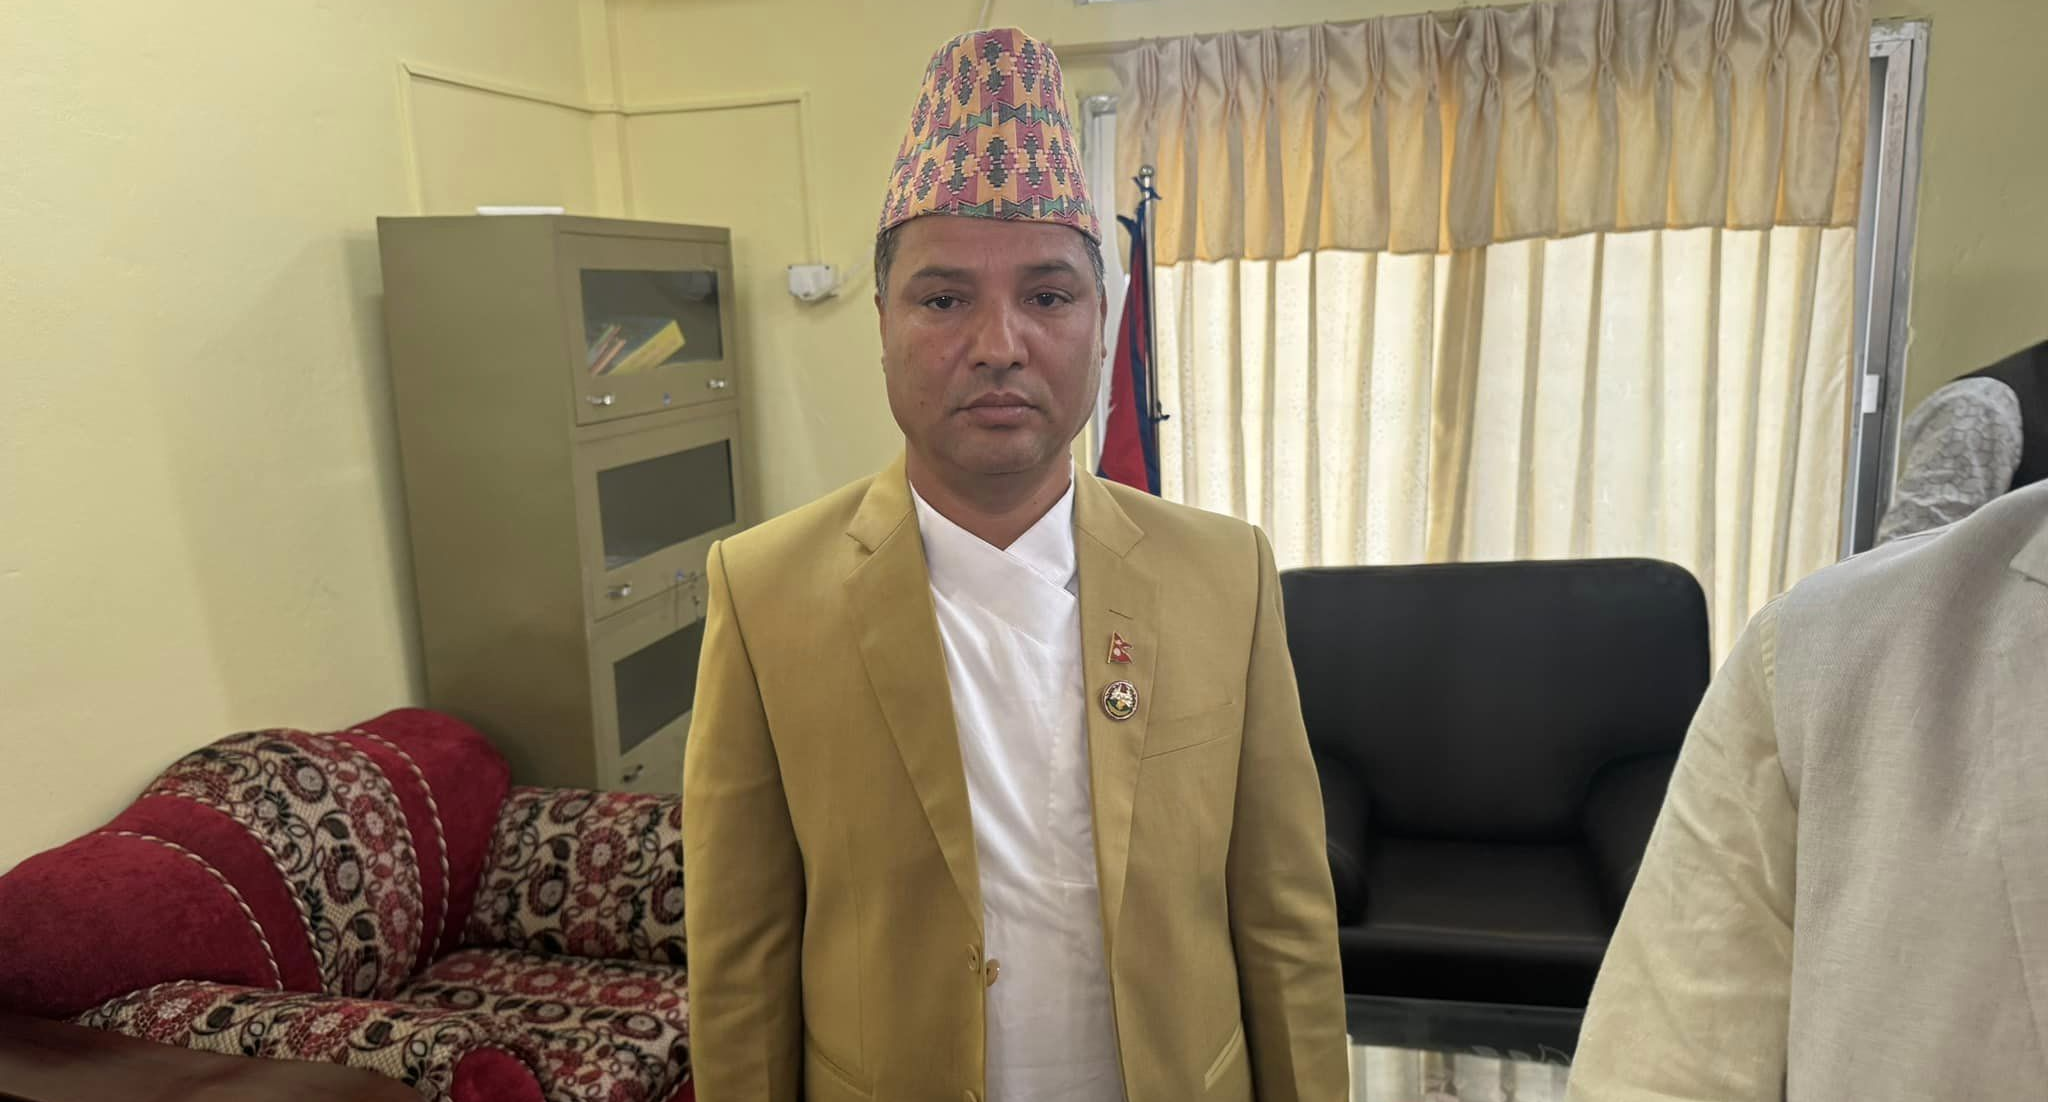 Sodari appointed as Chief Minister of Sudurpaschim Province